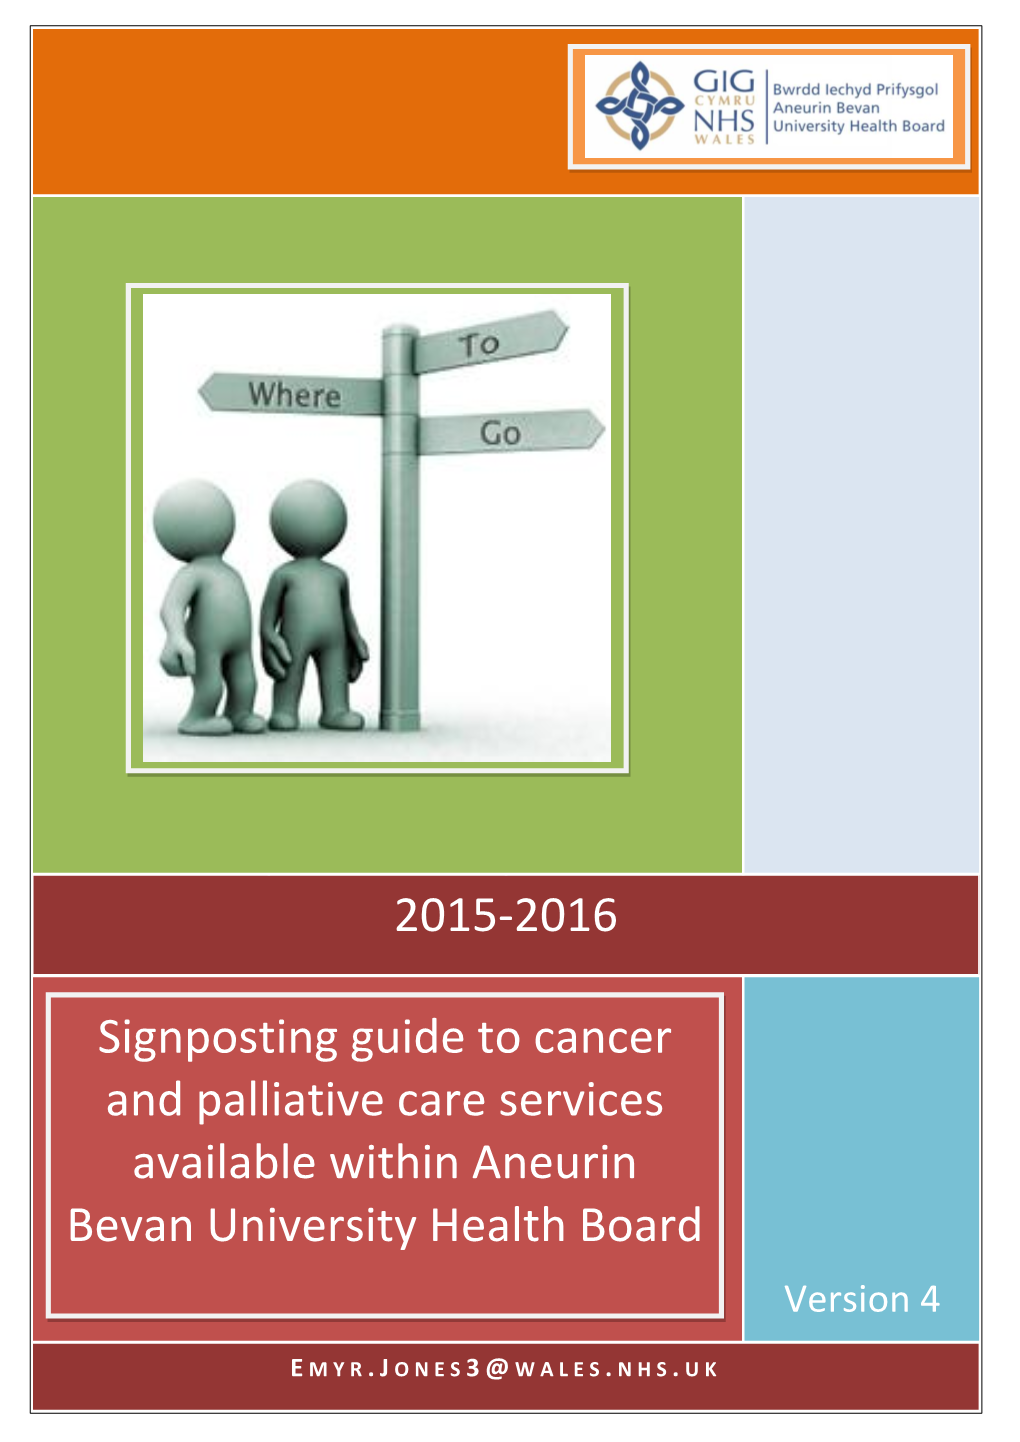 Signposting Guide to Cancer and Palliative Care Services Available Within Aneurin Bevan University Health Board